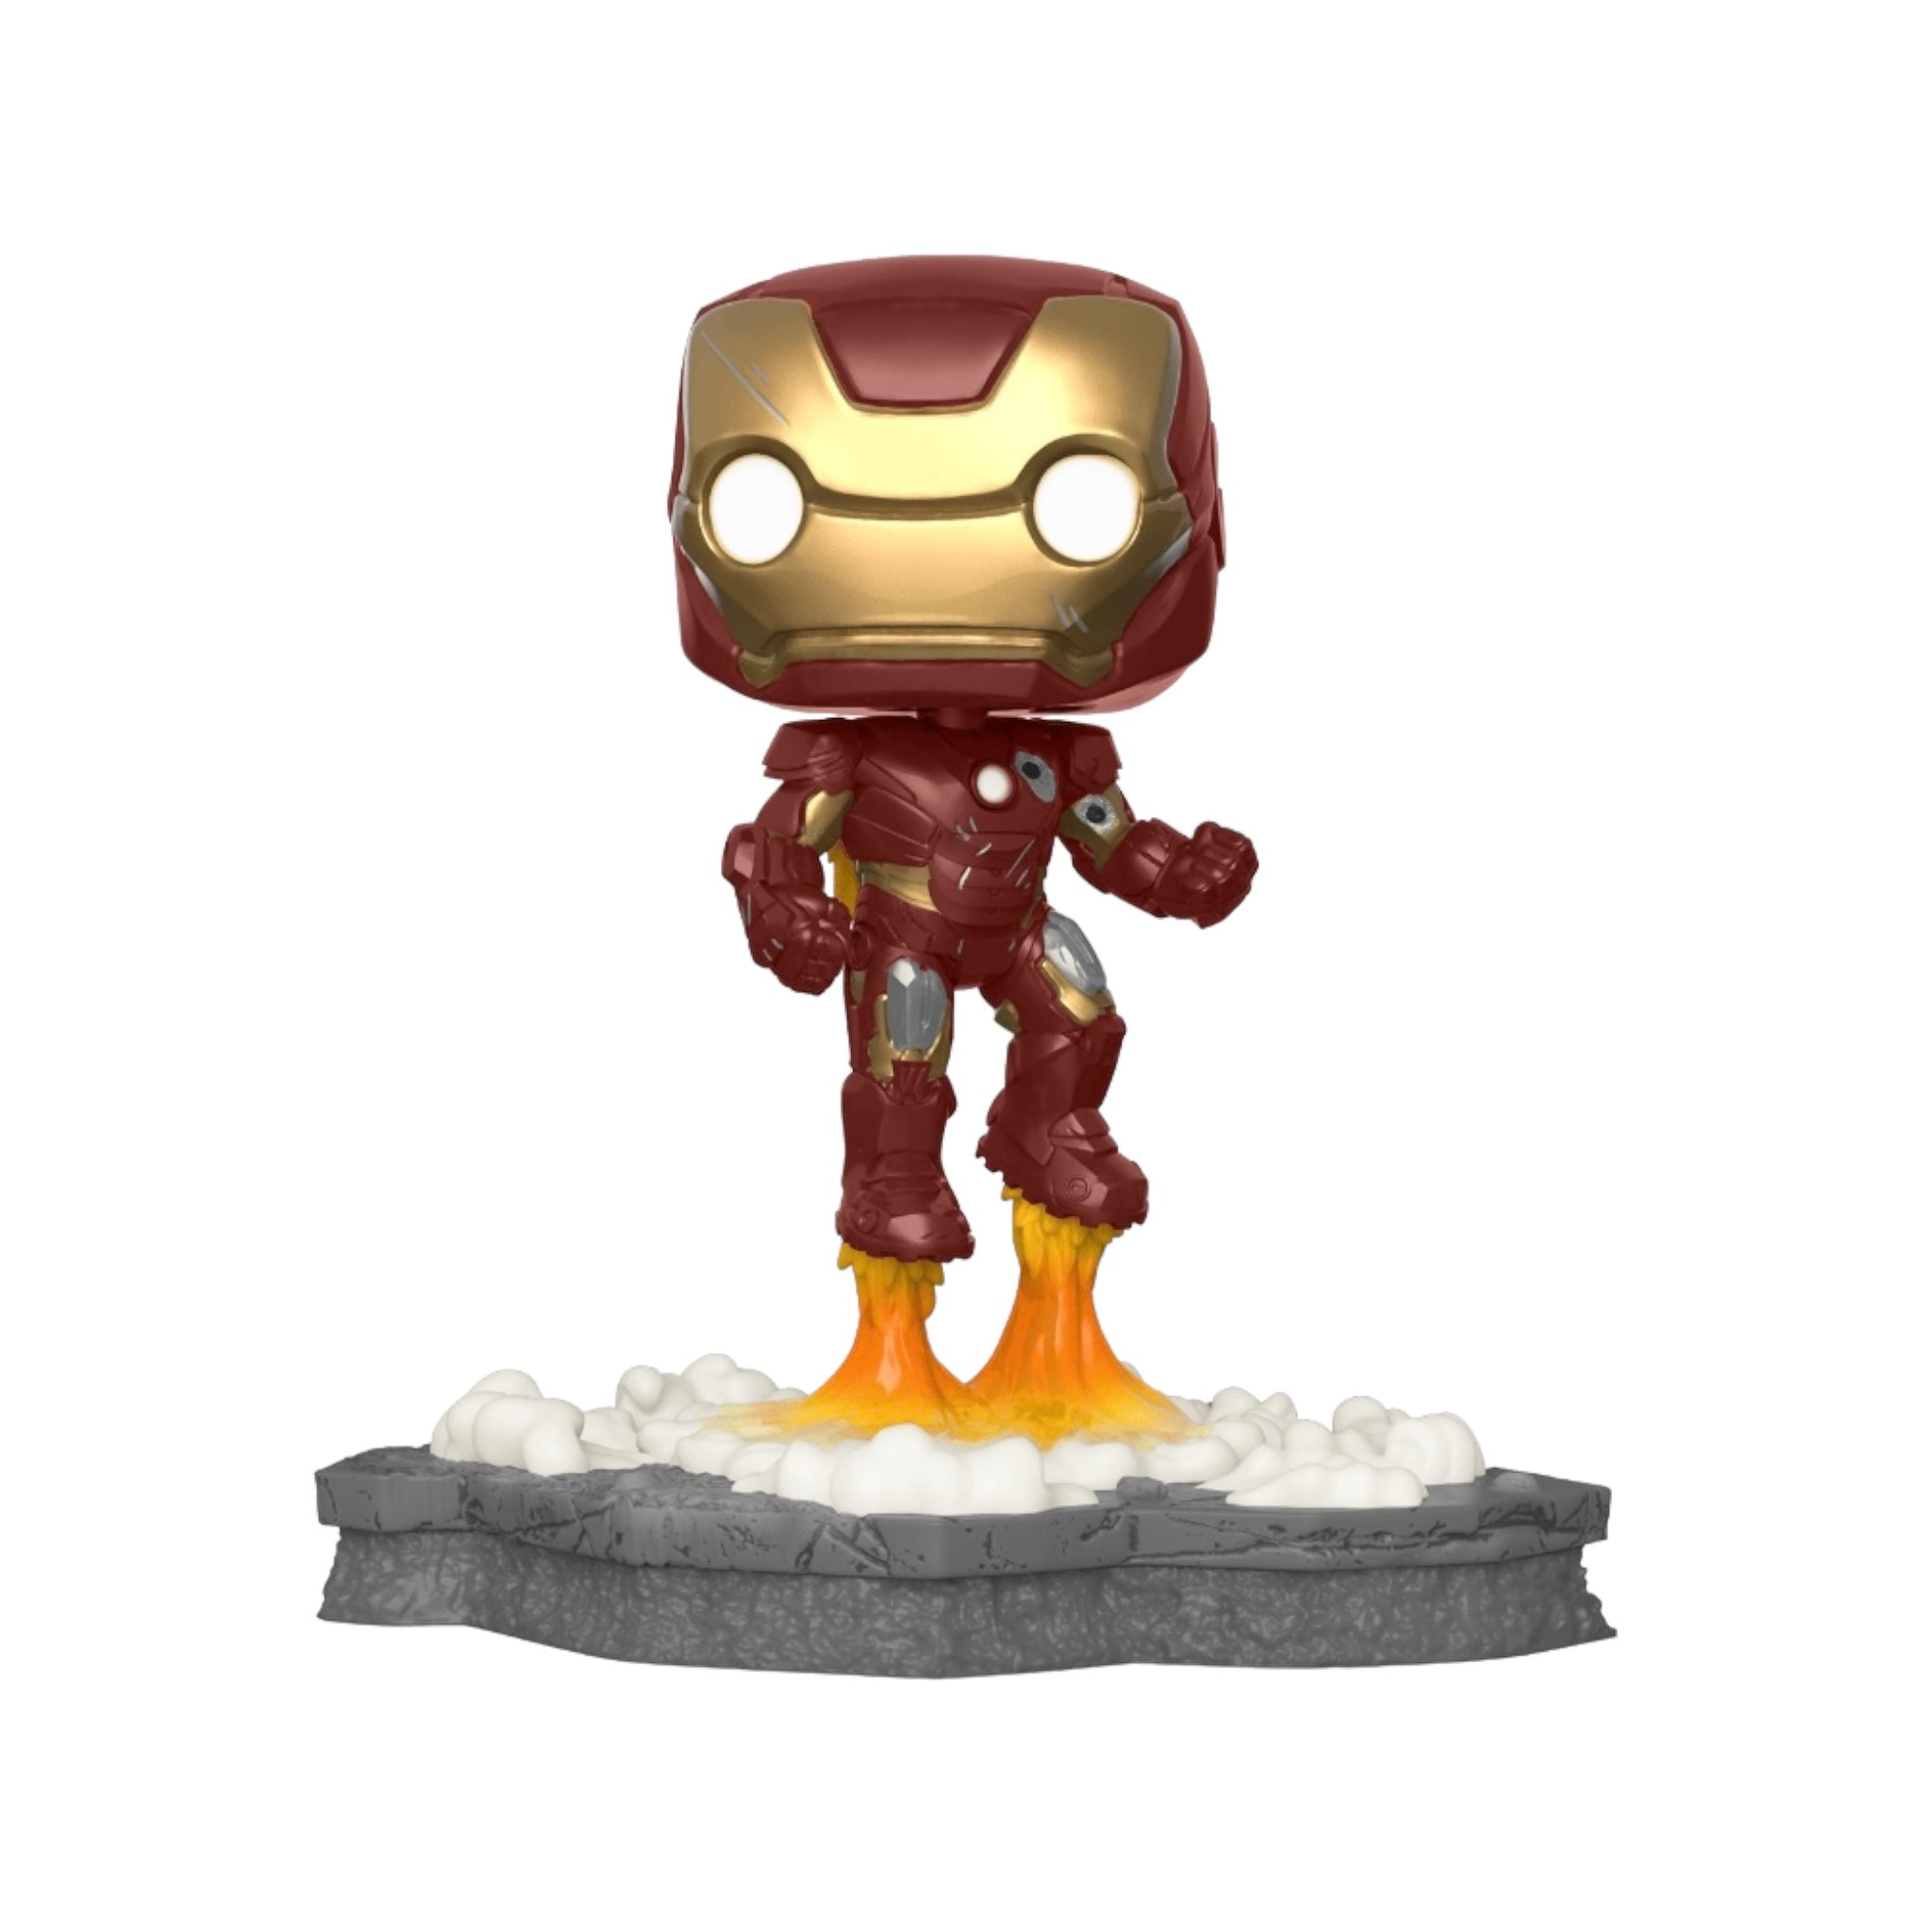 Avengers Assemble: Iron Man #584 Deluxe Funko Pop! - The Avengers - Special Edition - Condition 8/10